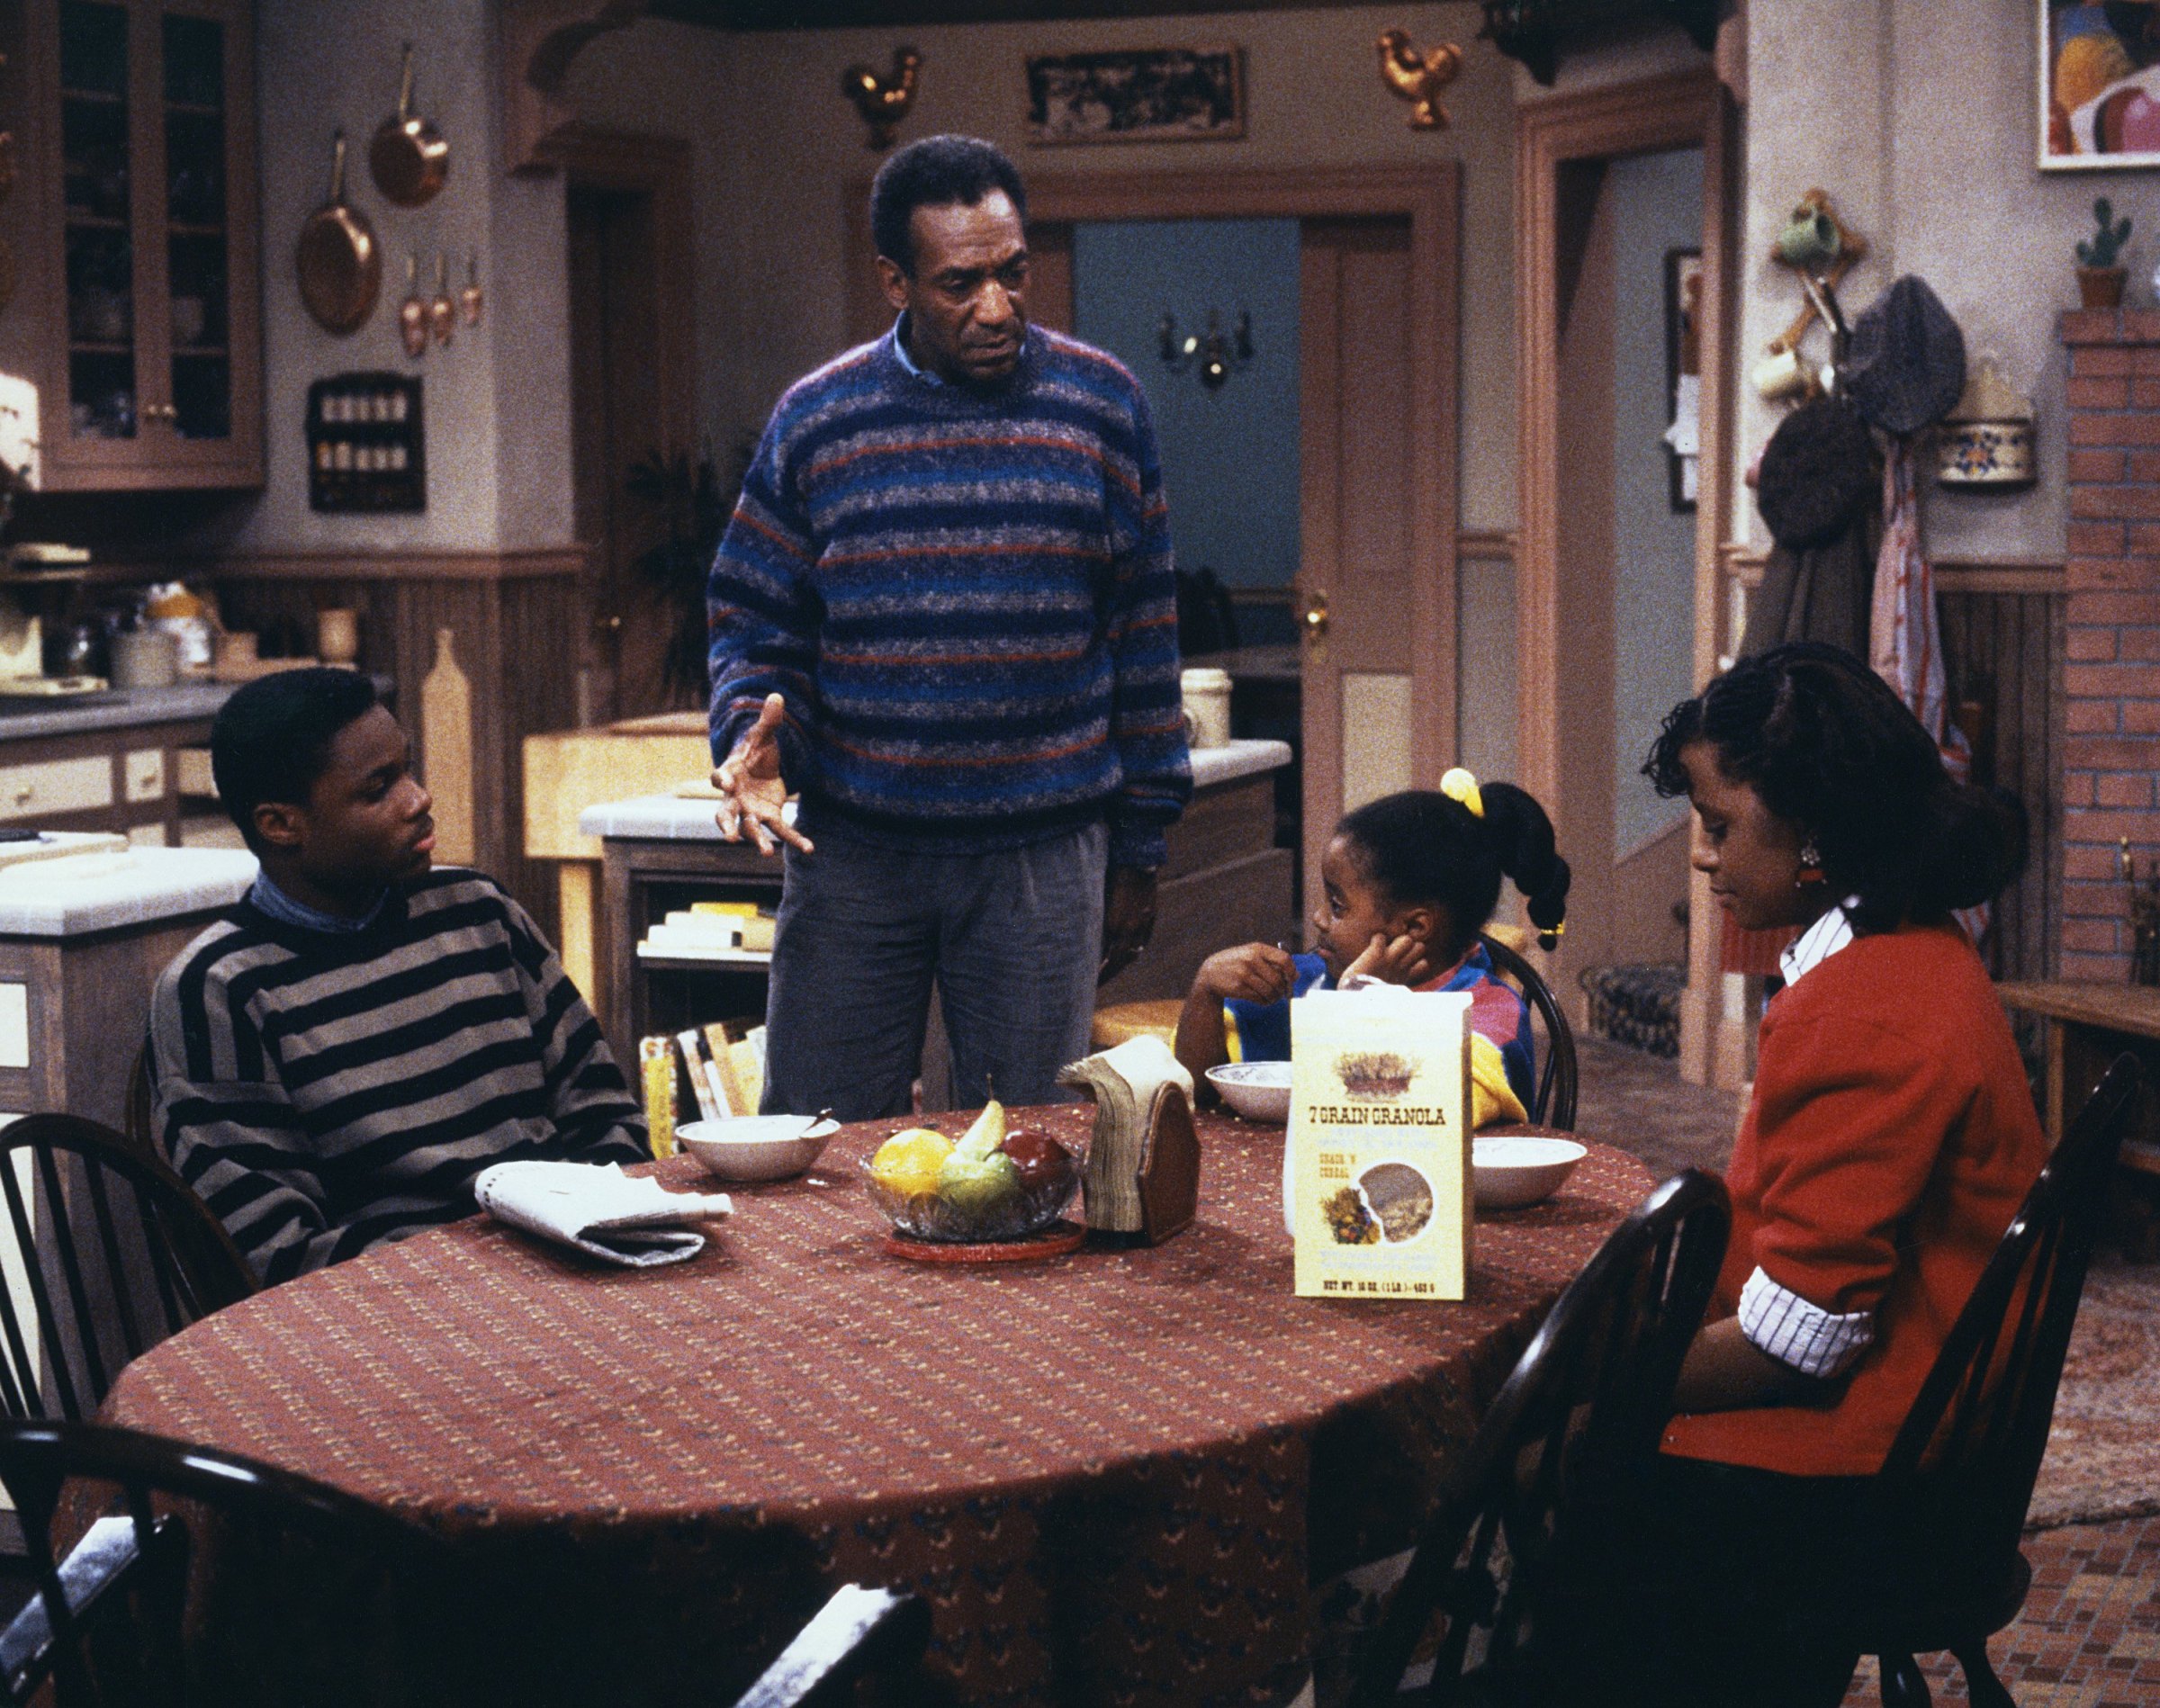 (Left to Right) Malcolm-Jamal Warner as Theodore 'Theo' Huxtable, Bill Cosby as Dr. Heathcliff 'Cliff' Huxtable, Keshia Knight Pulliam as Rudy Huxtable, Tempestt Bledsoe as Vanessa Huxtable on The Cosby Show.